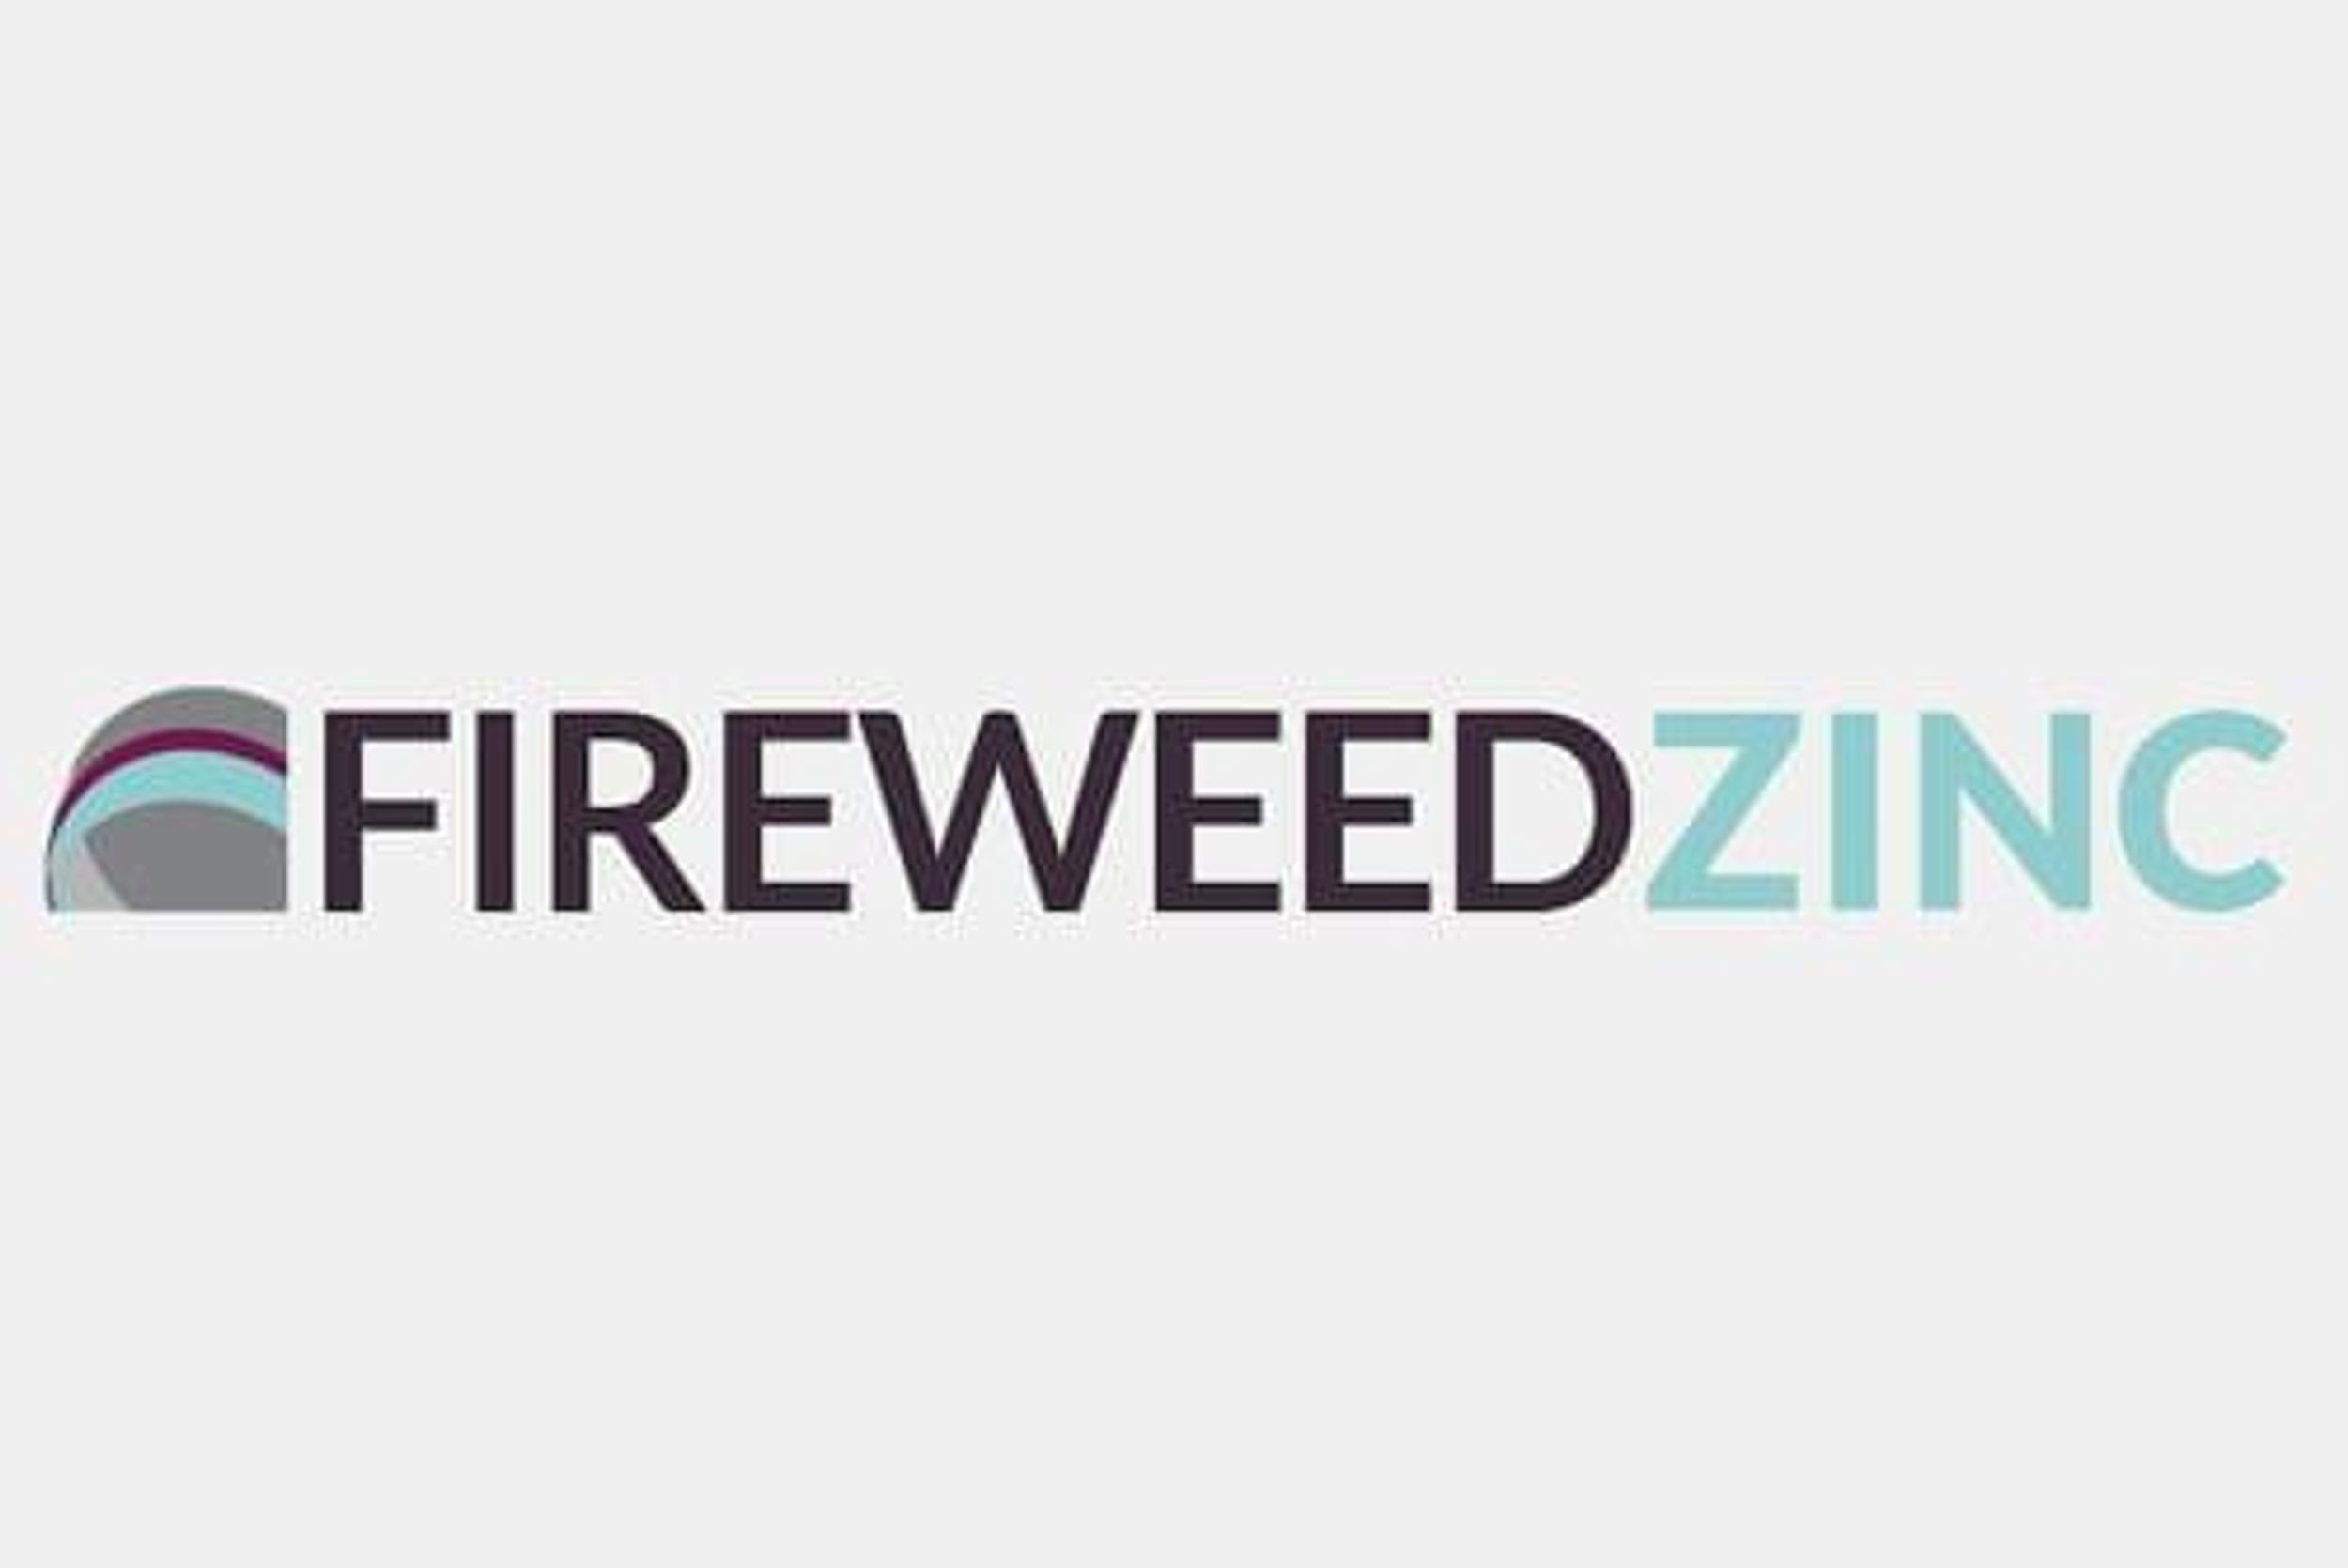 Fireweed Zinc Provides Final Boundary Zone Drill Results and a 2021 Exploration Review